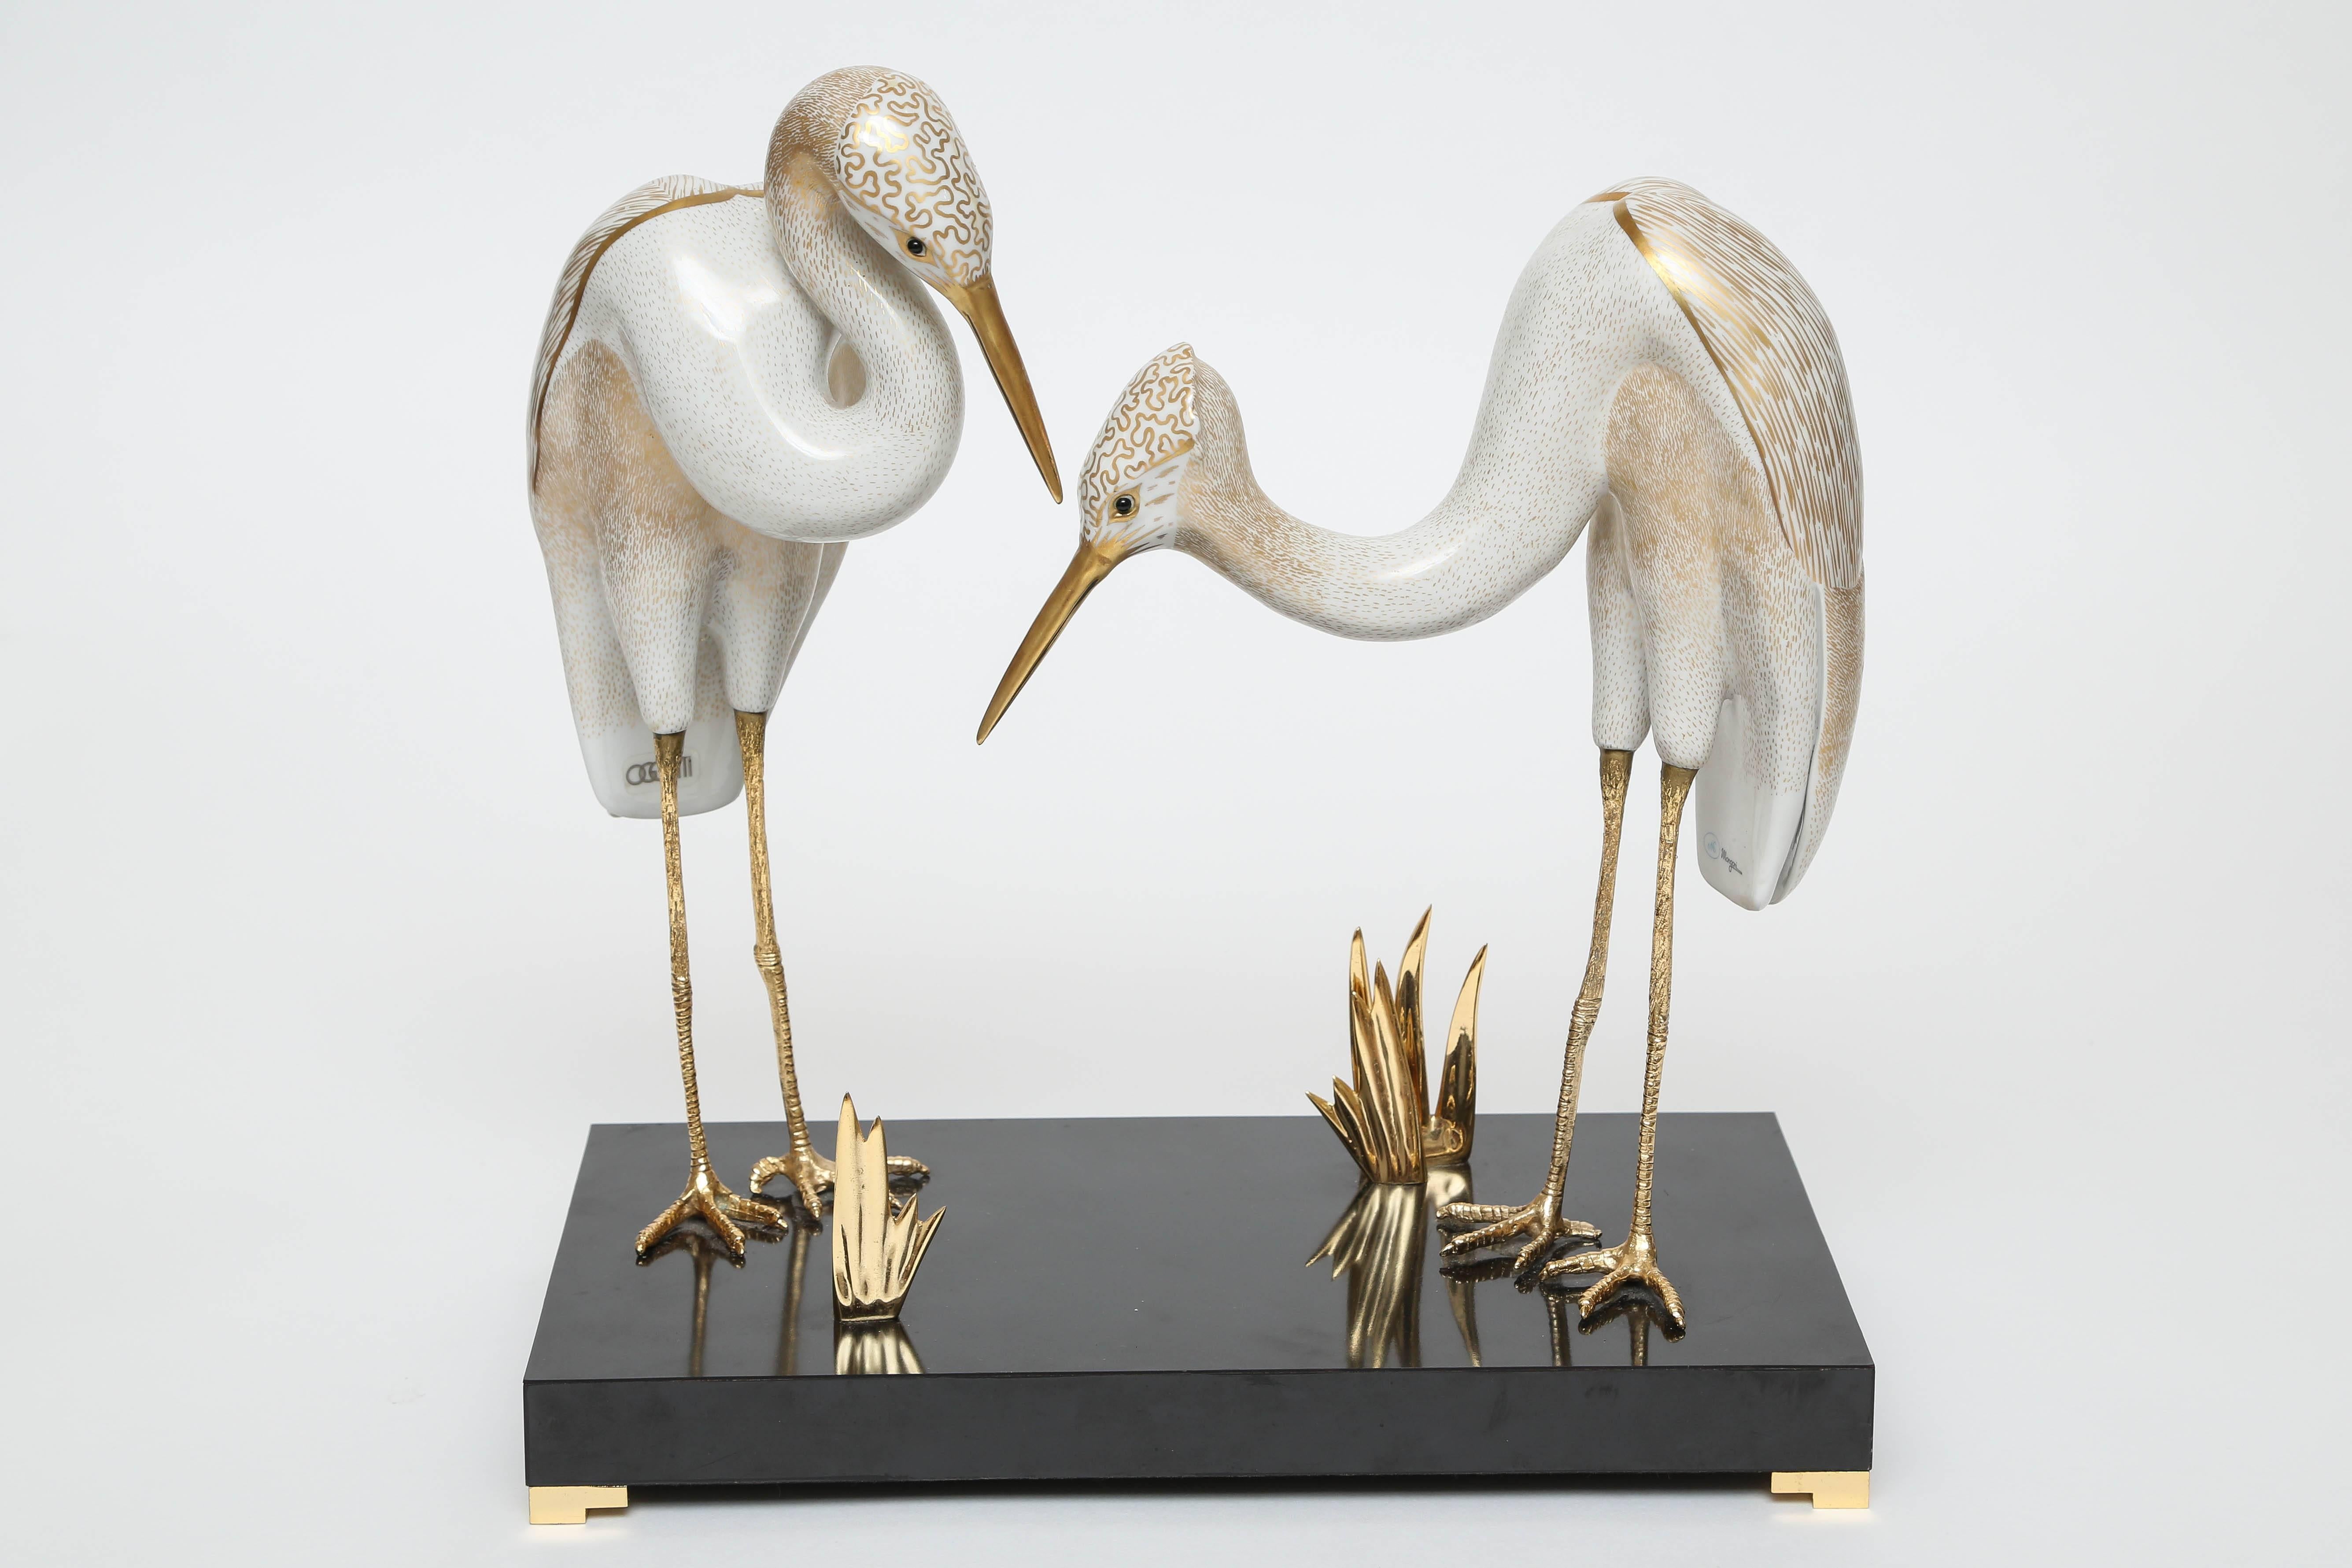 Elegant pair of porcelain birds by Mangani for Oggetti. These birds stand on gilt bronze legs with 24-karat gold trim.